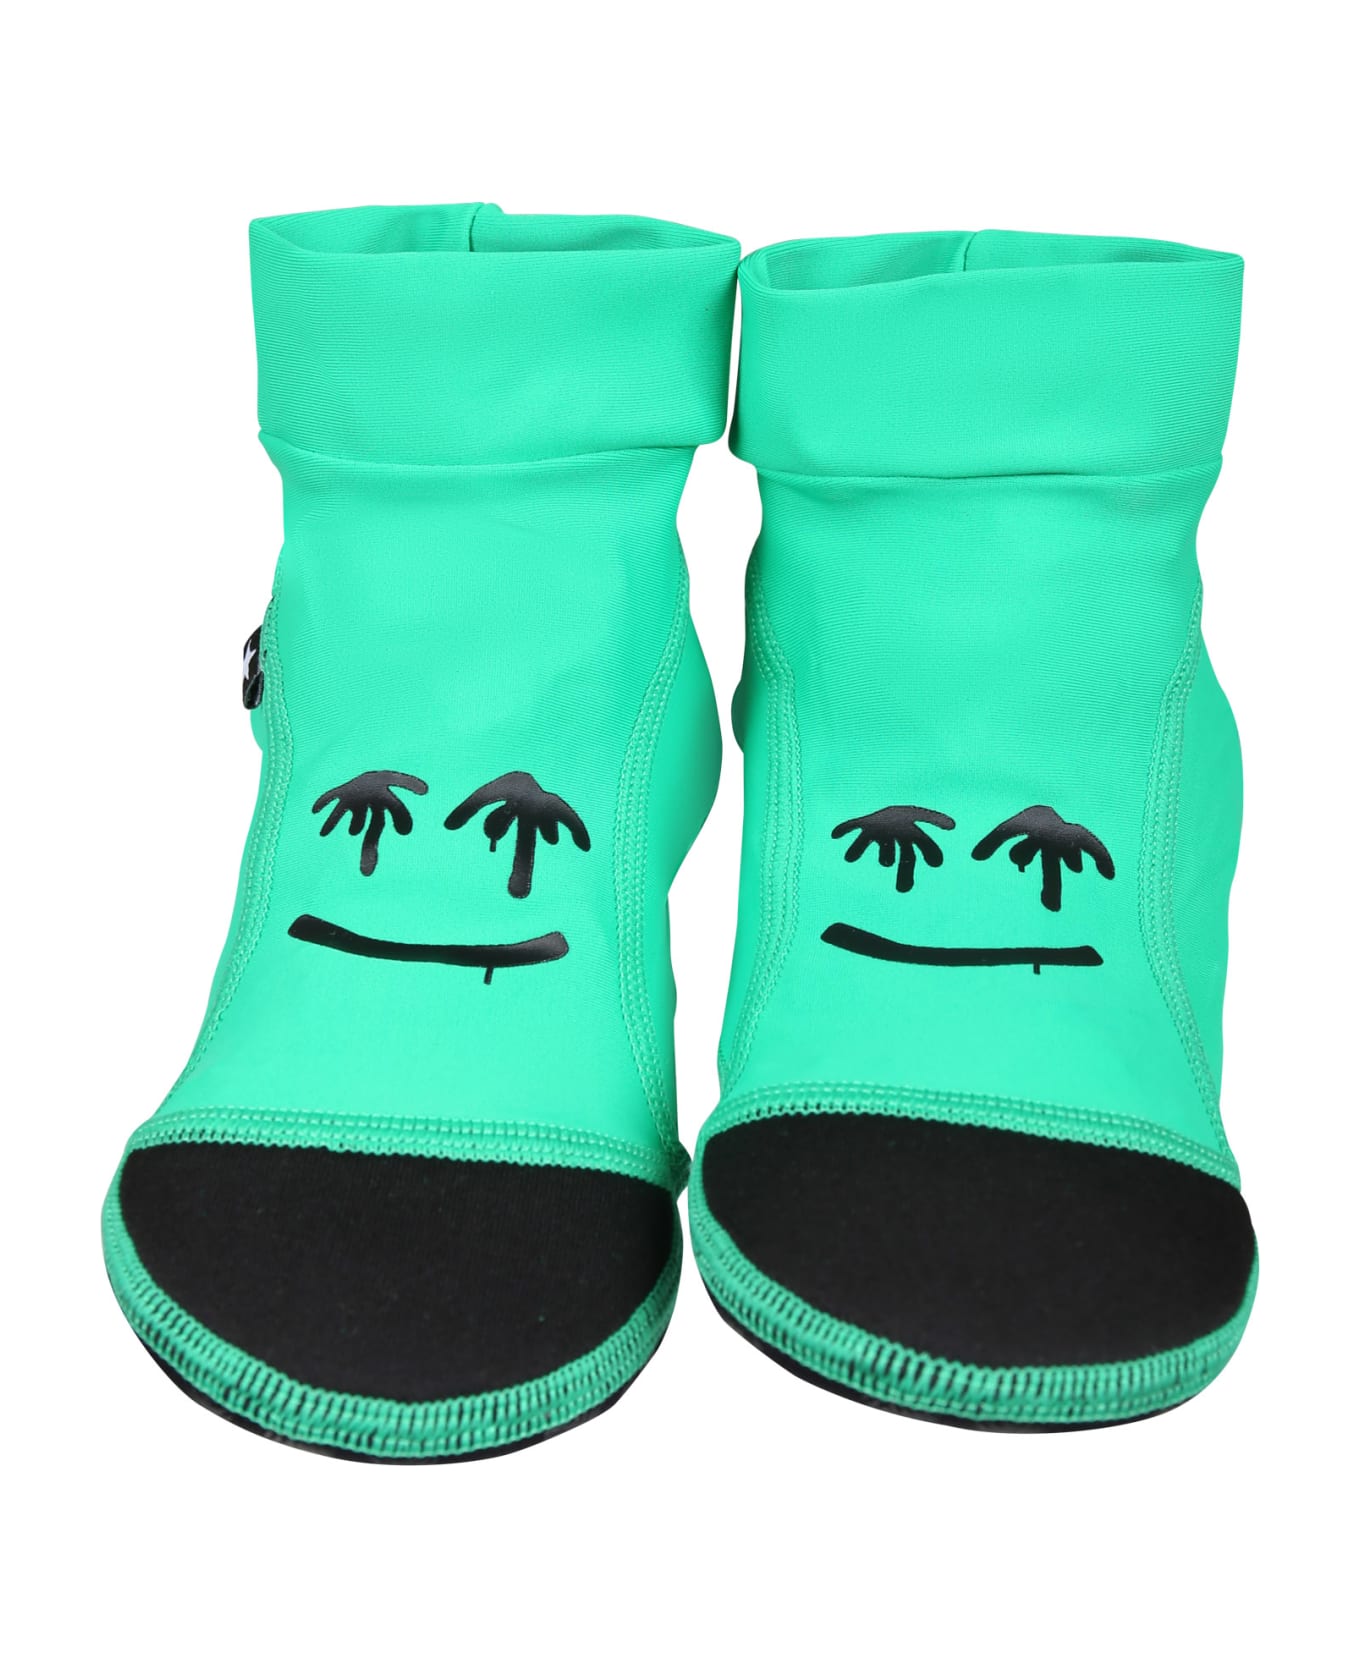 Molo Green Socks For Kids With Smiley - Green シューズ